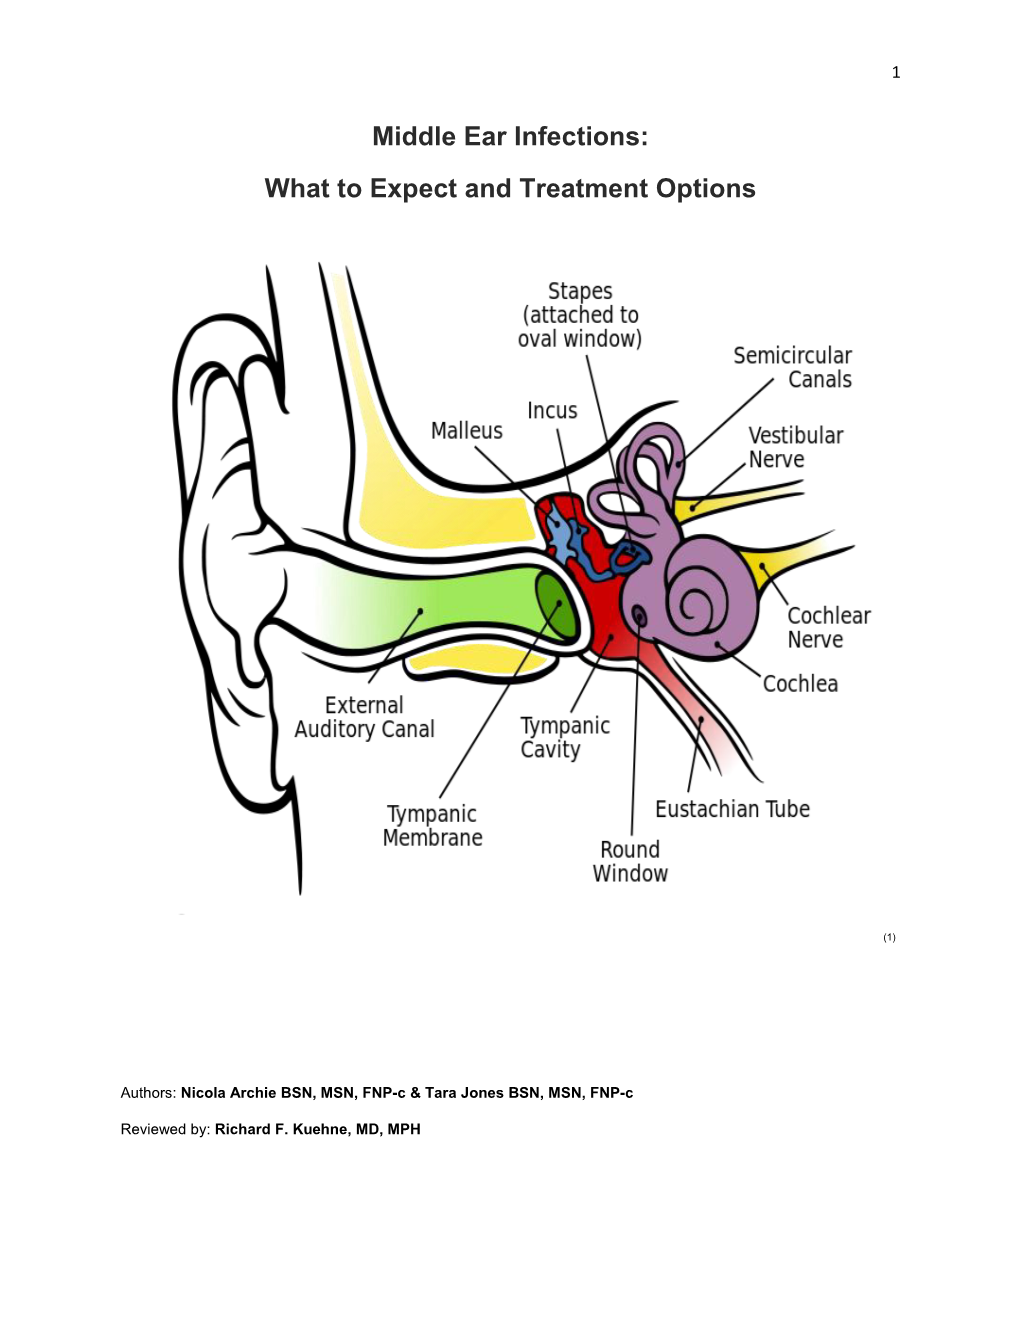 Middle Ear Infections: What to Expect and Treatment Options